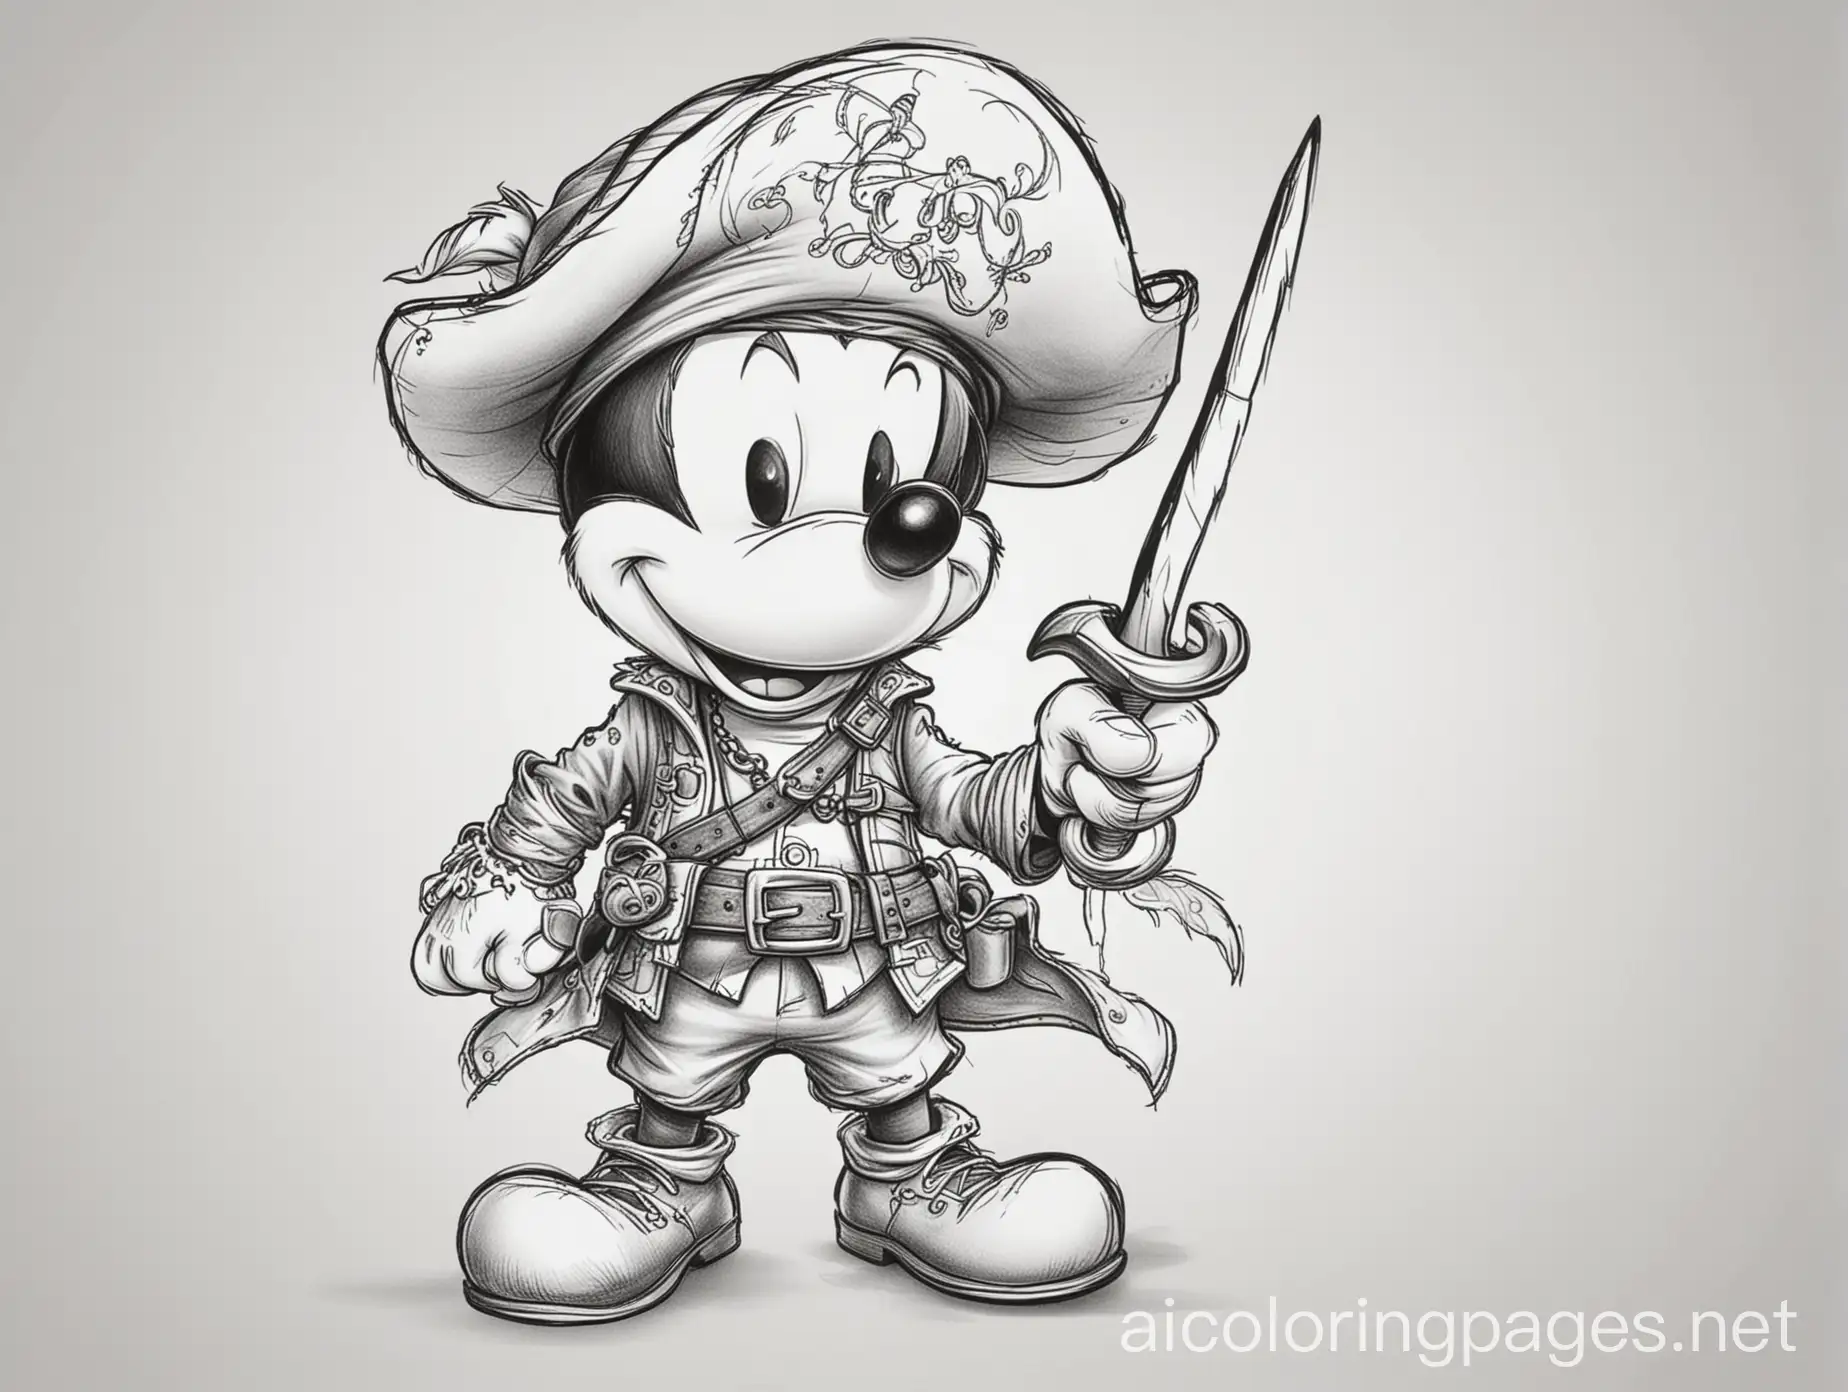 mickey mouse dressed like a pirate, Coloring Page, black and white, line art, white background, Simplicity, Ample White Space. The background of the coloring page is plain white to make it easy for young children to color within the lines. The outlines of all the subjects are easy to distinguish, making it simple for kids to color without too much difficulty